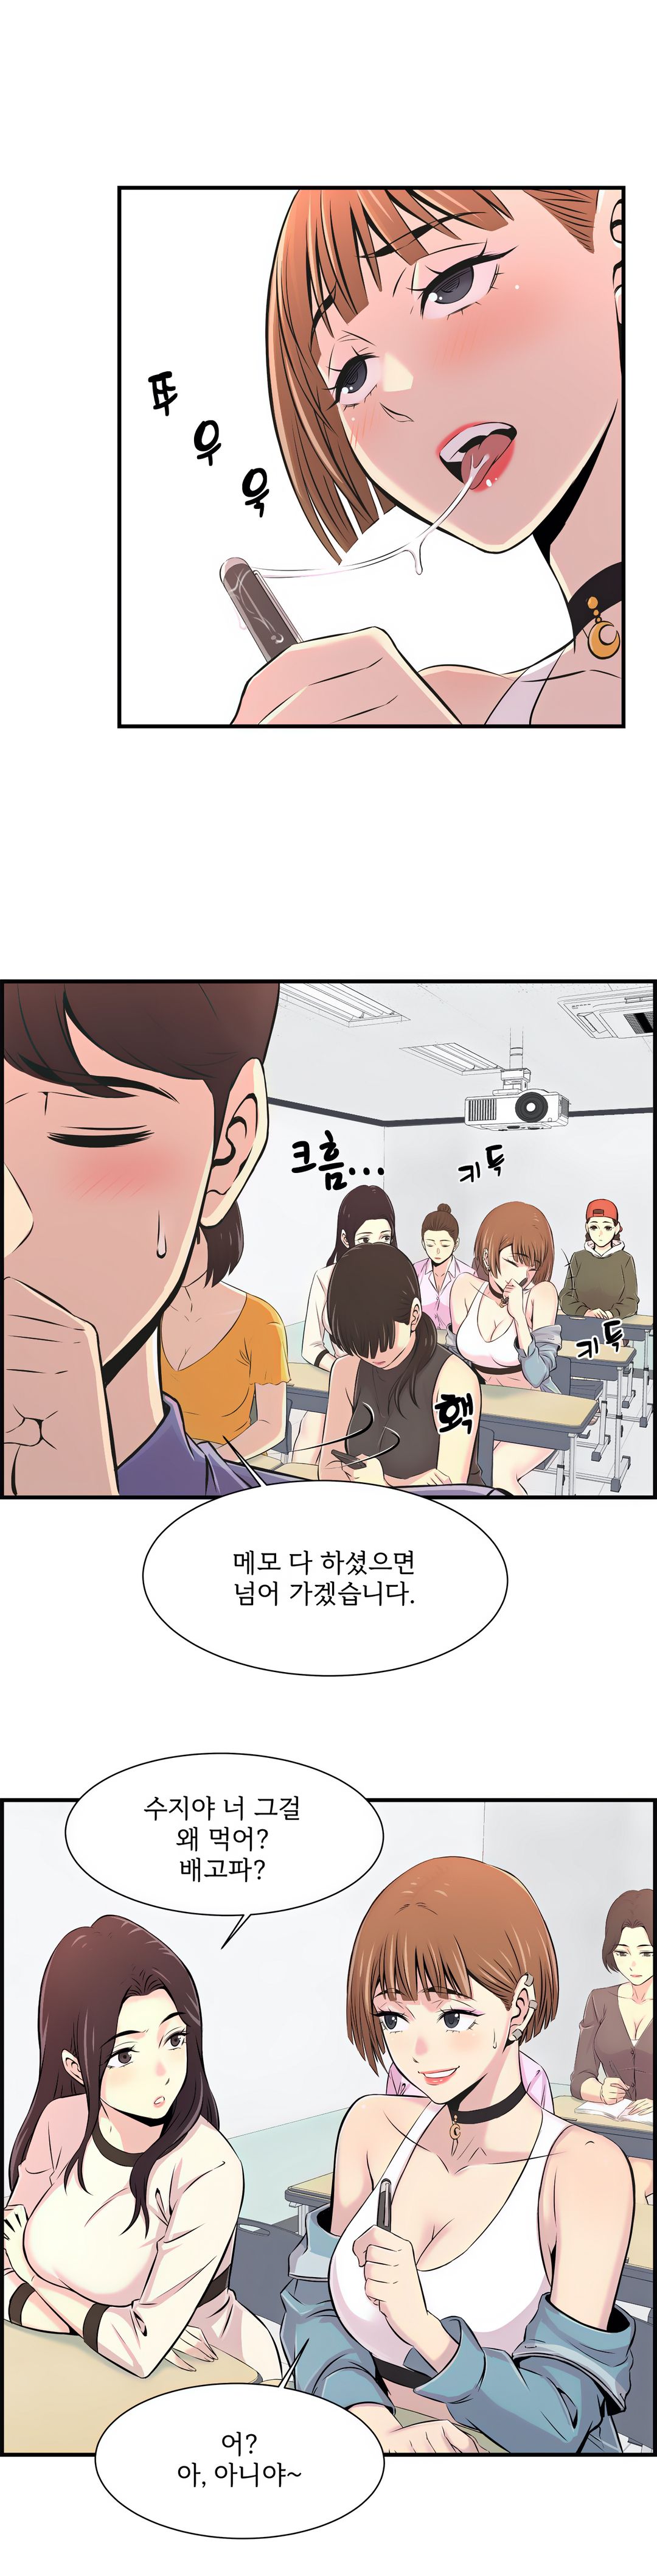 Cram School Scandal Raw - Chapter 4 Page 30